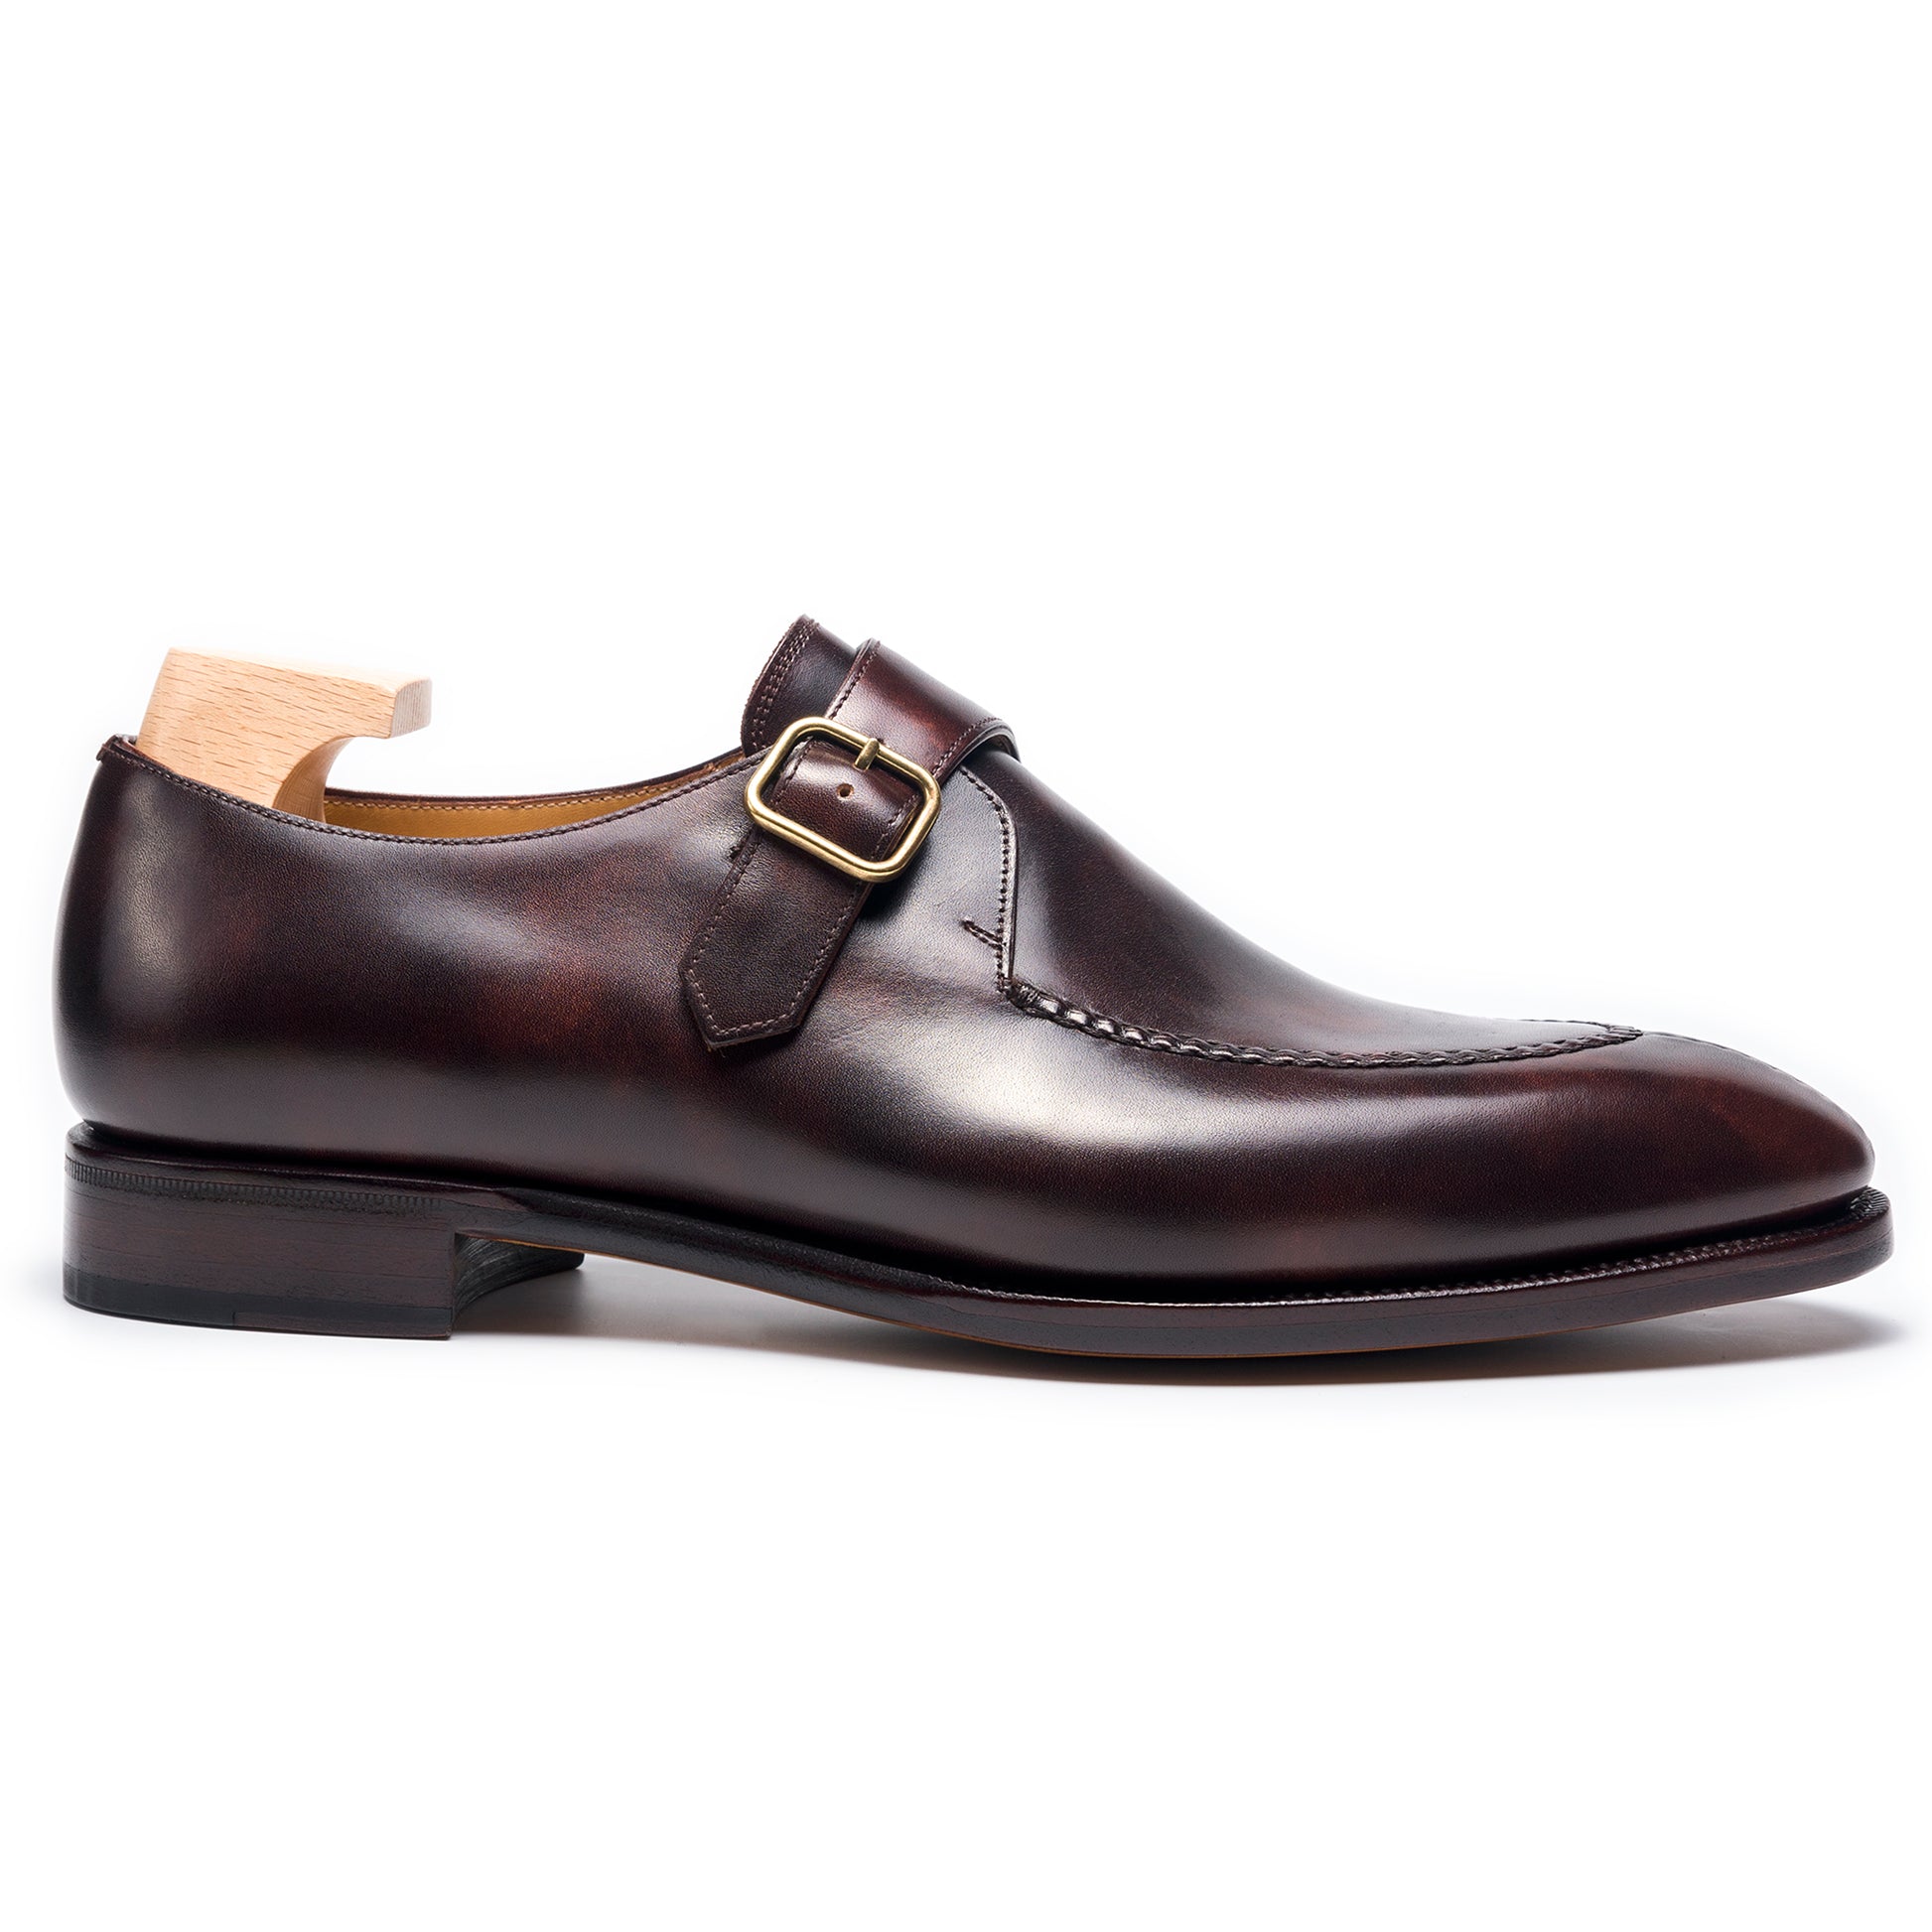 TLB Mallorca leather shoes 204 / GOYA / MUSEUM CALF BROWN / GOLD